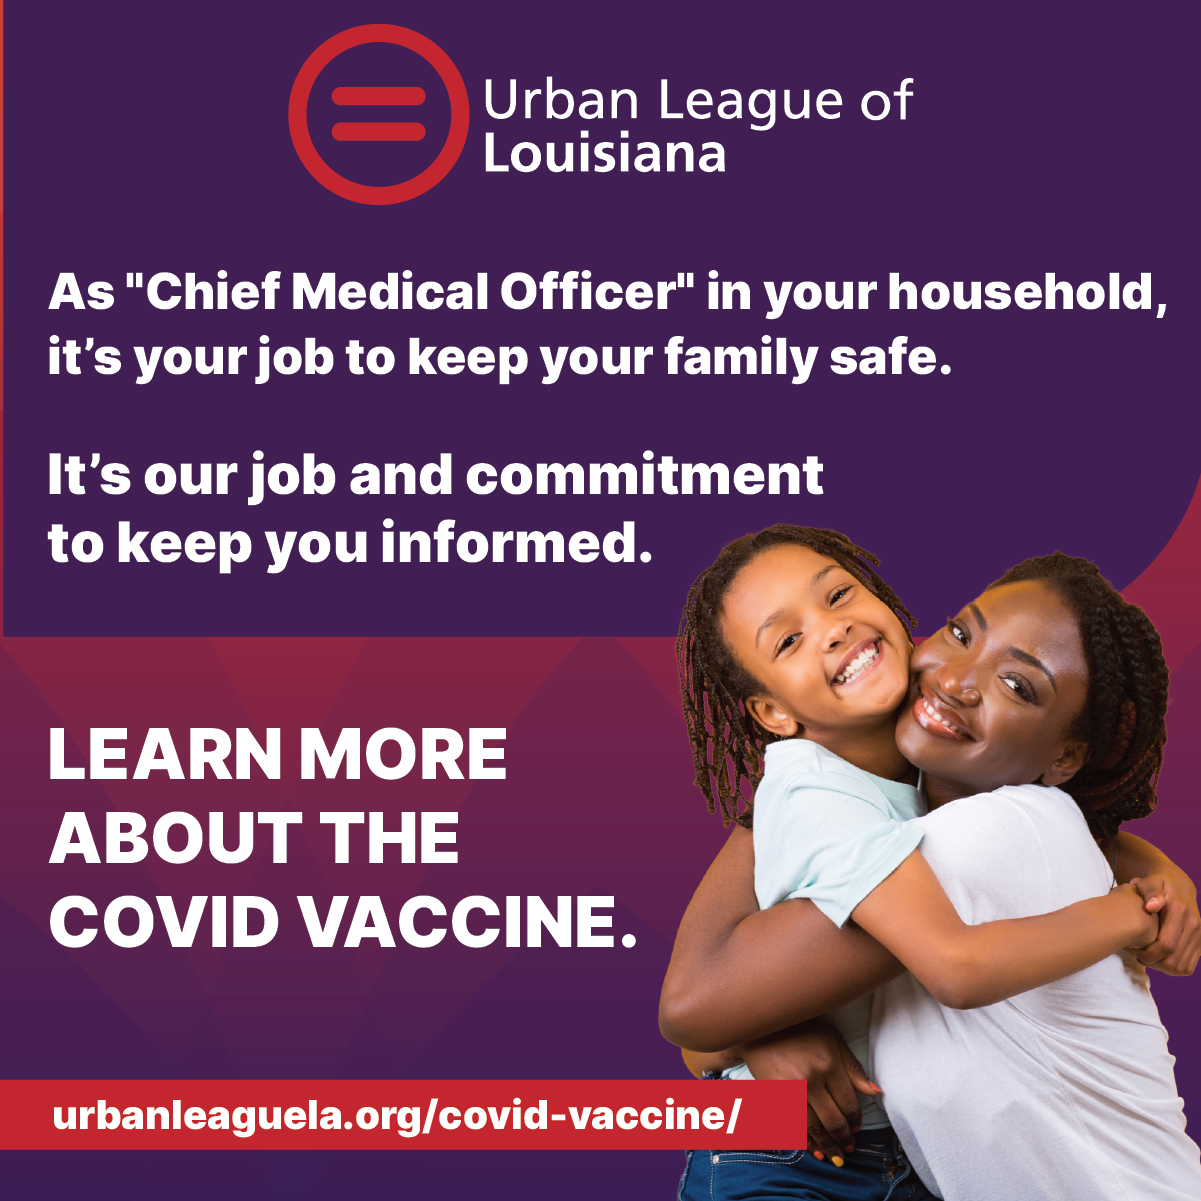 Are you ready to hug? Schedule your vaccine.